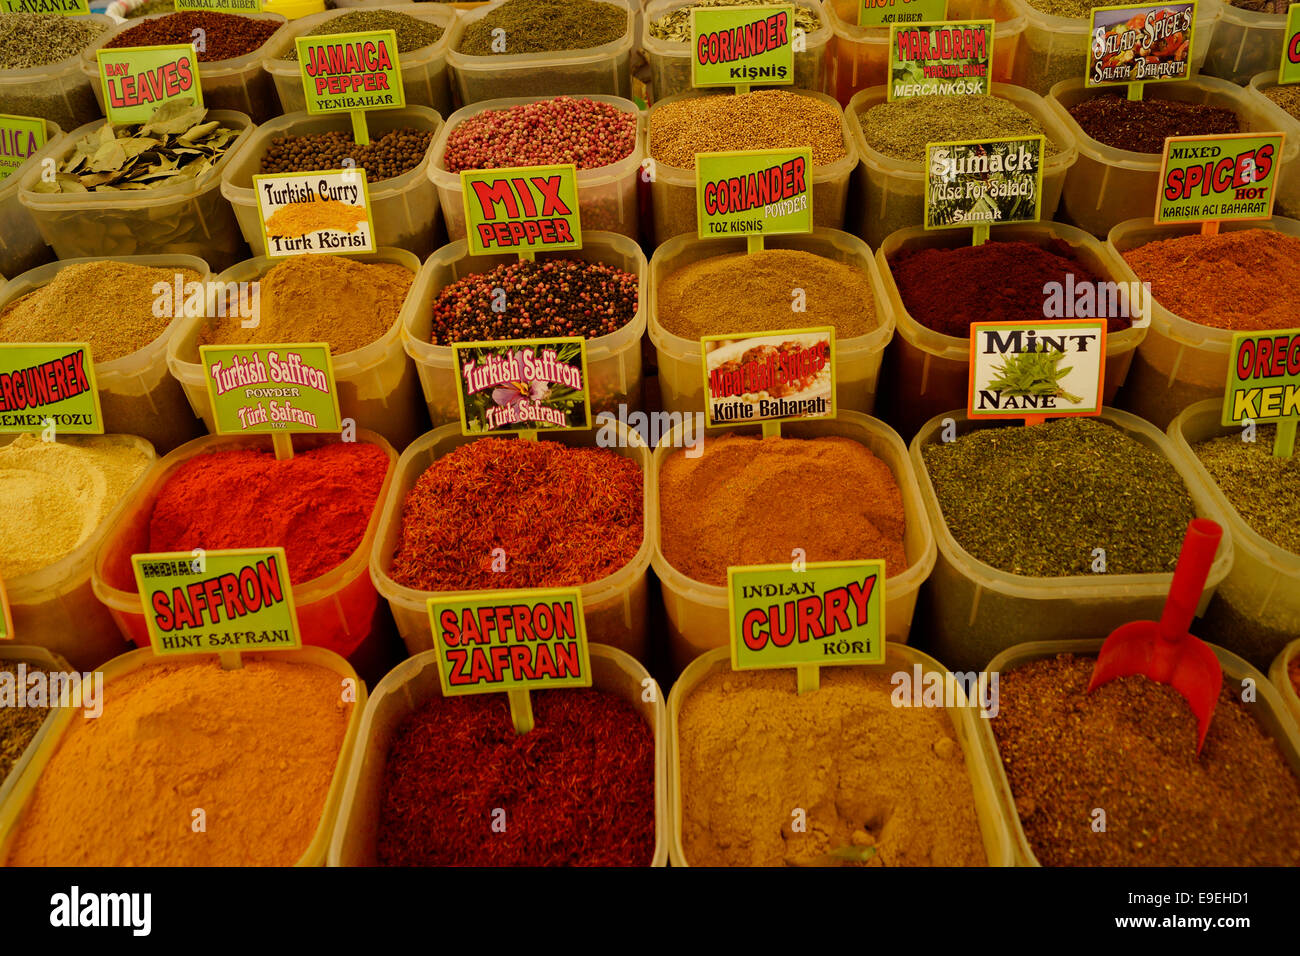 Spices so nice, so colourful and bright. Stock Photo